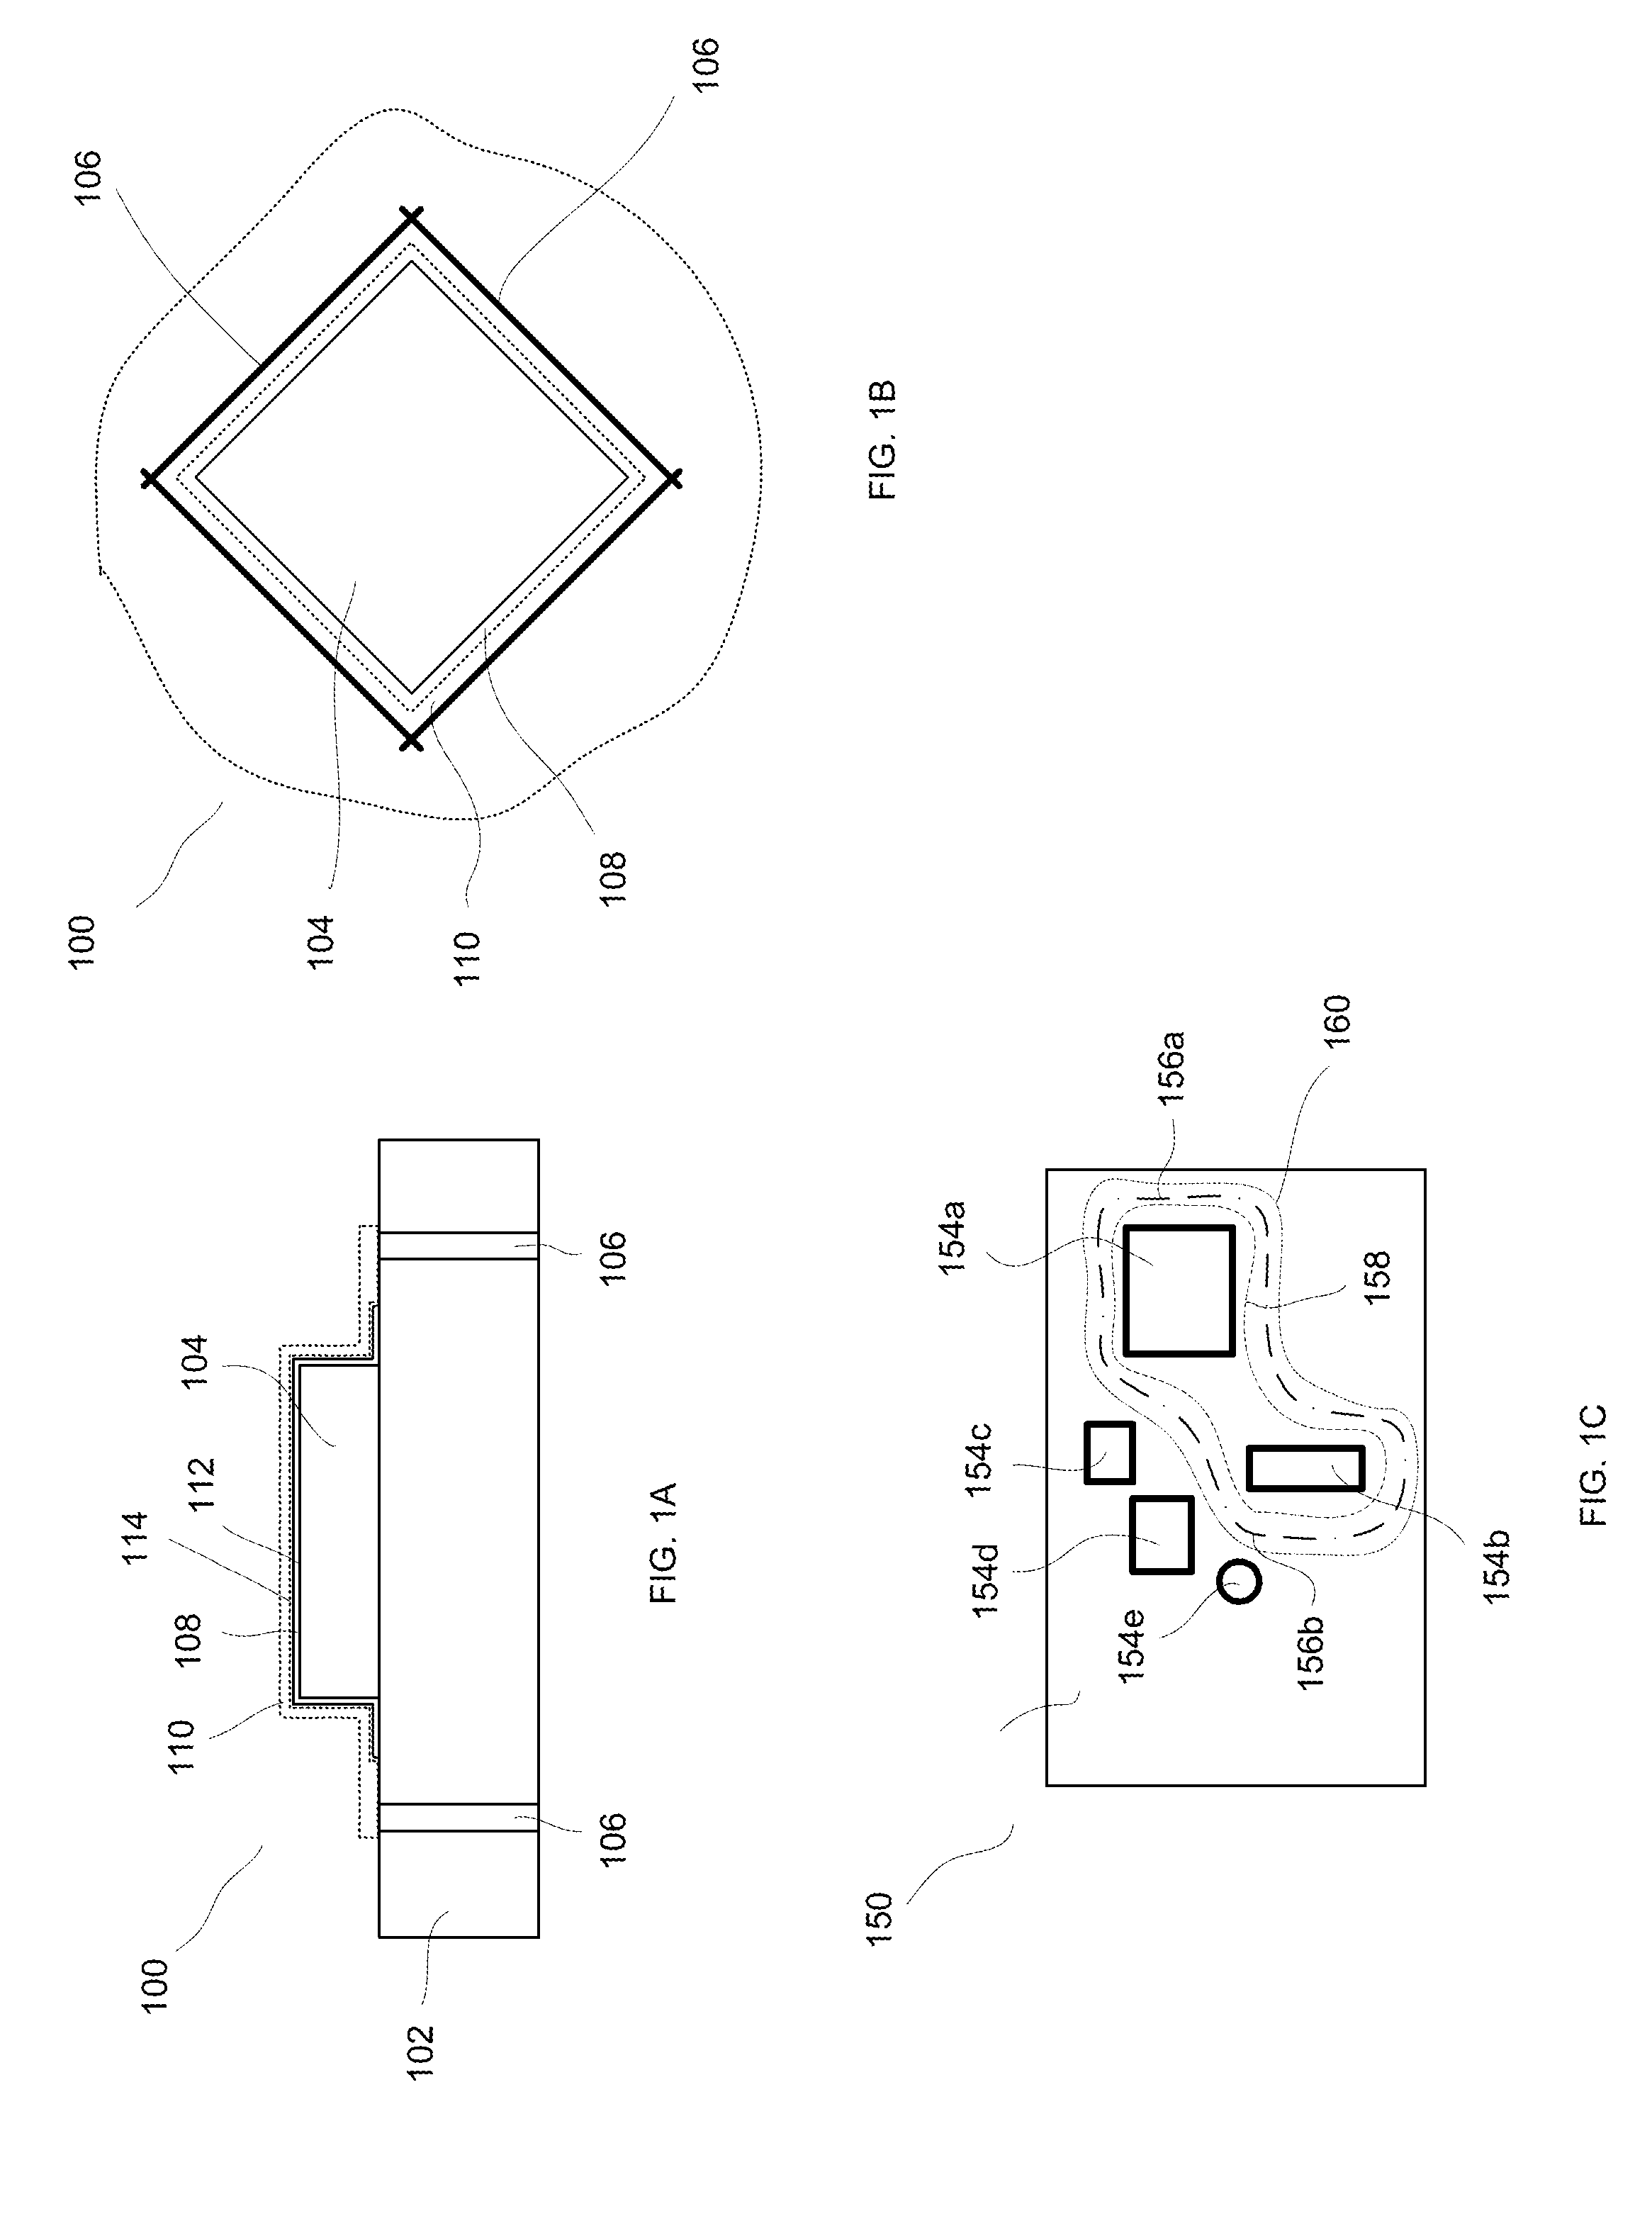 Systems and methods for shielding circuitry from interference with conformal coating